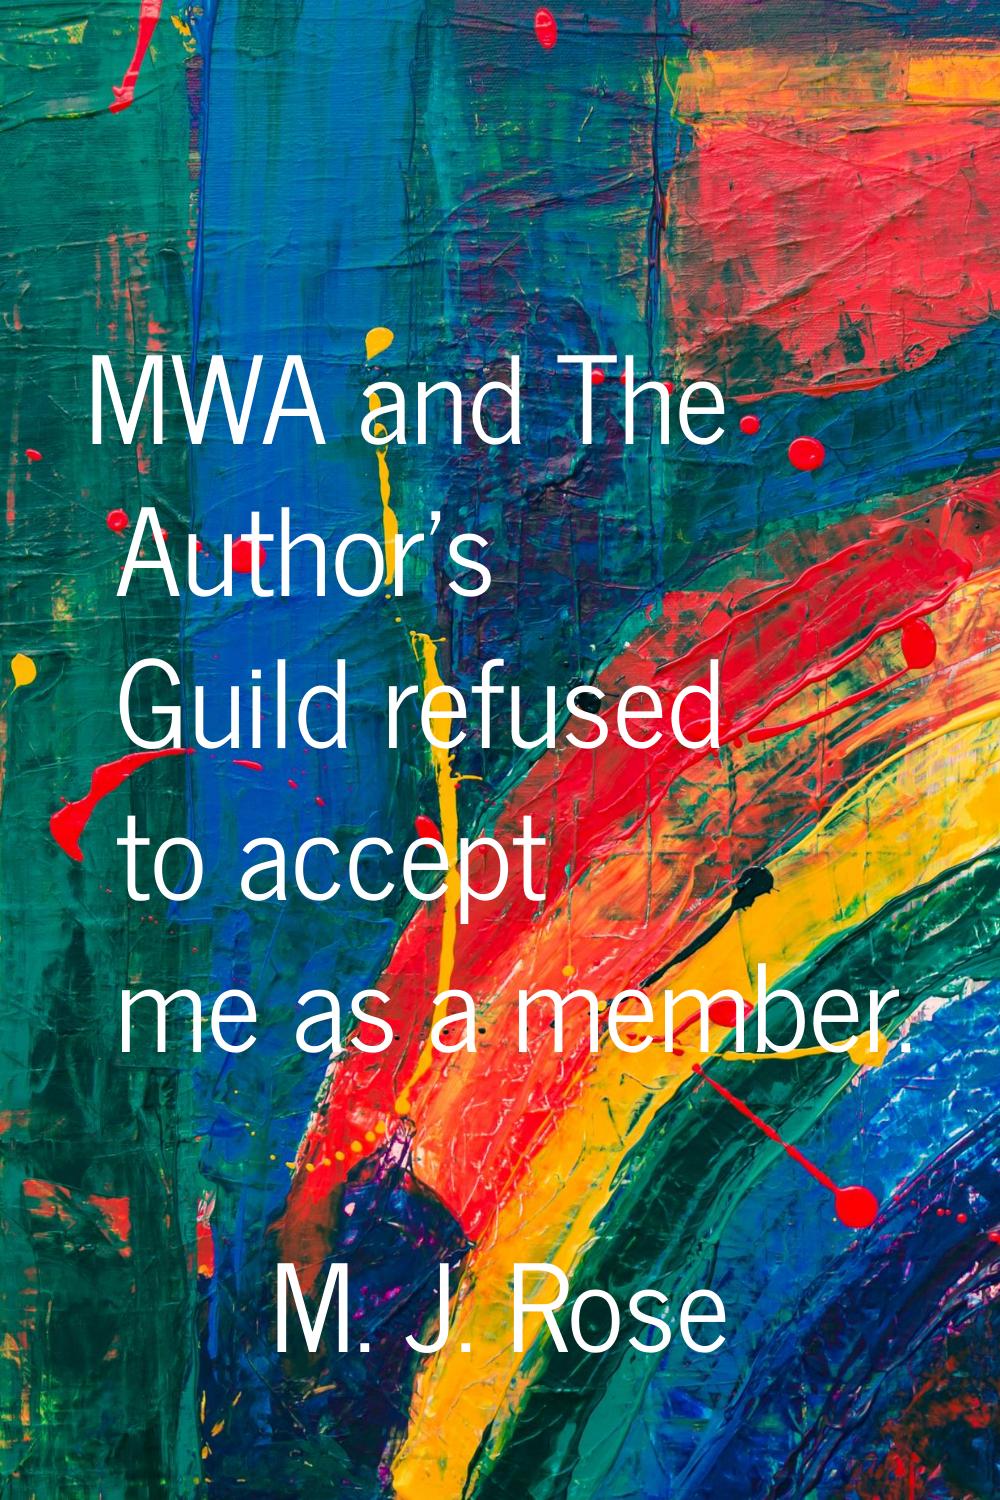 MWA and The Author's Guild refused to accept me as a member.